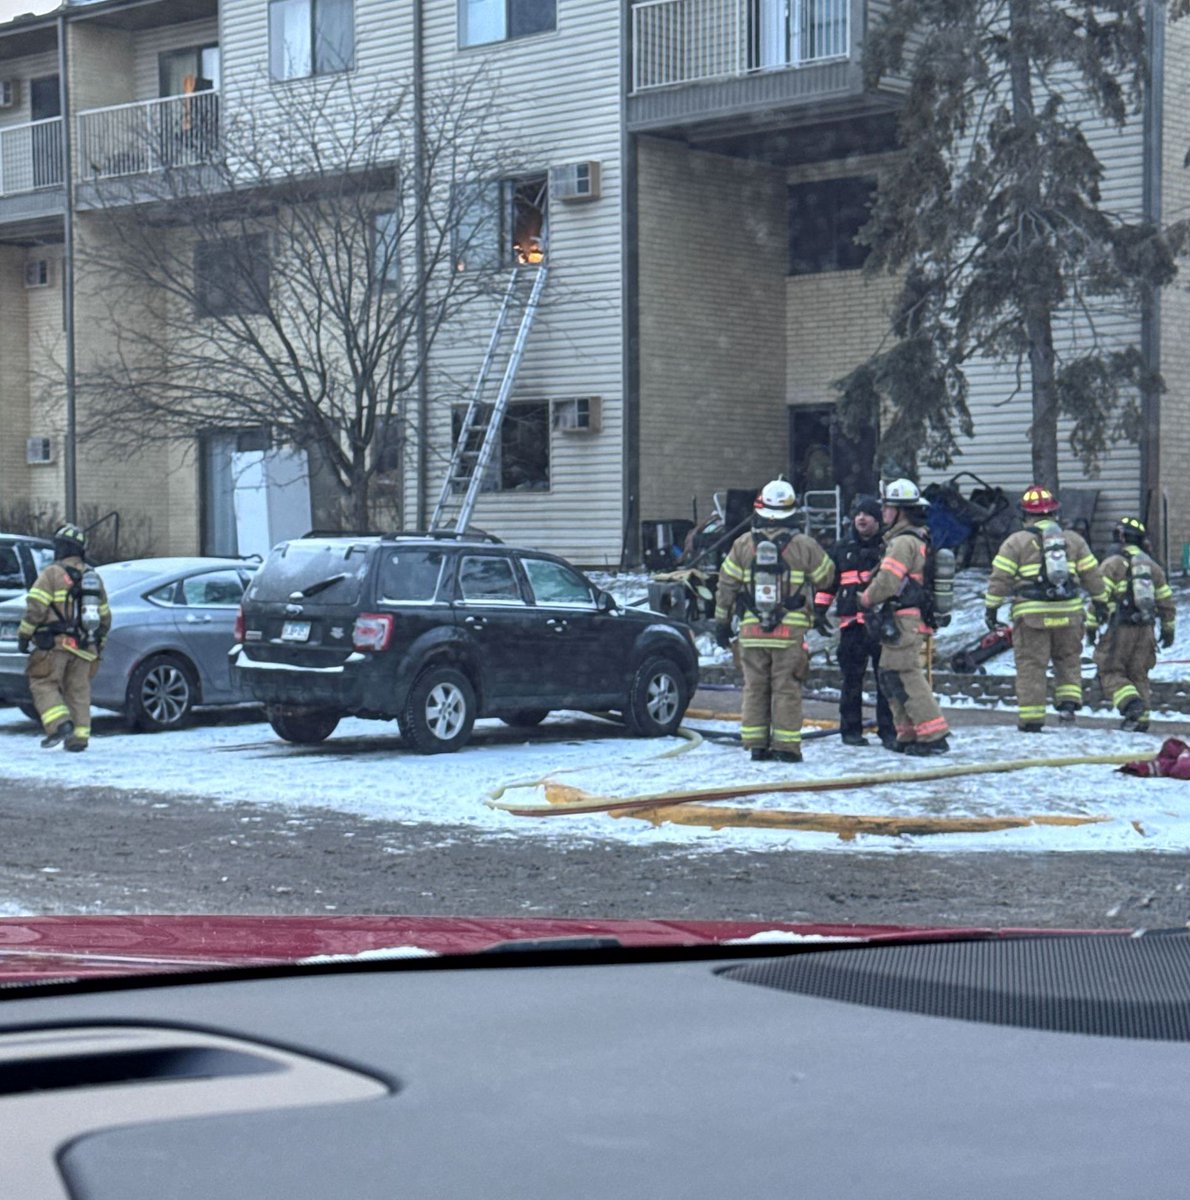 Roseville firefighters responded to a fire at a townhouse on the 2700 block of Asbury where two adults were transported to the hospital for smoke inhalation.